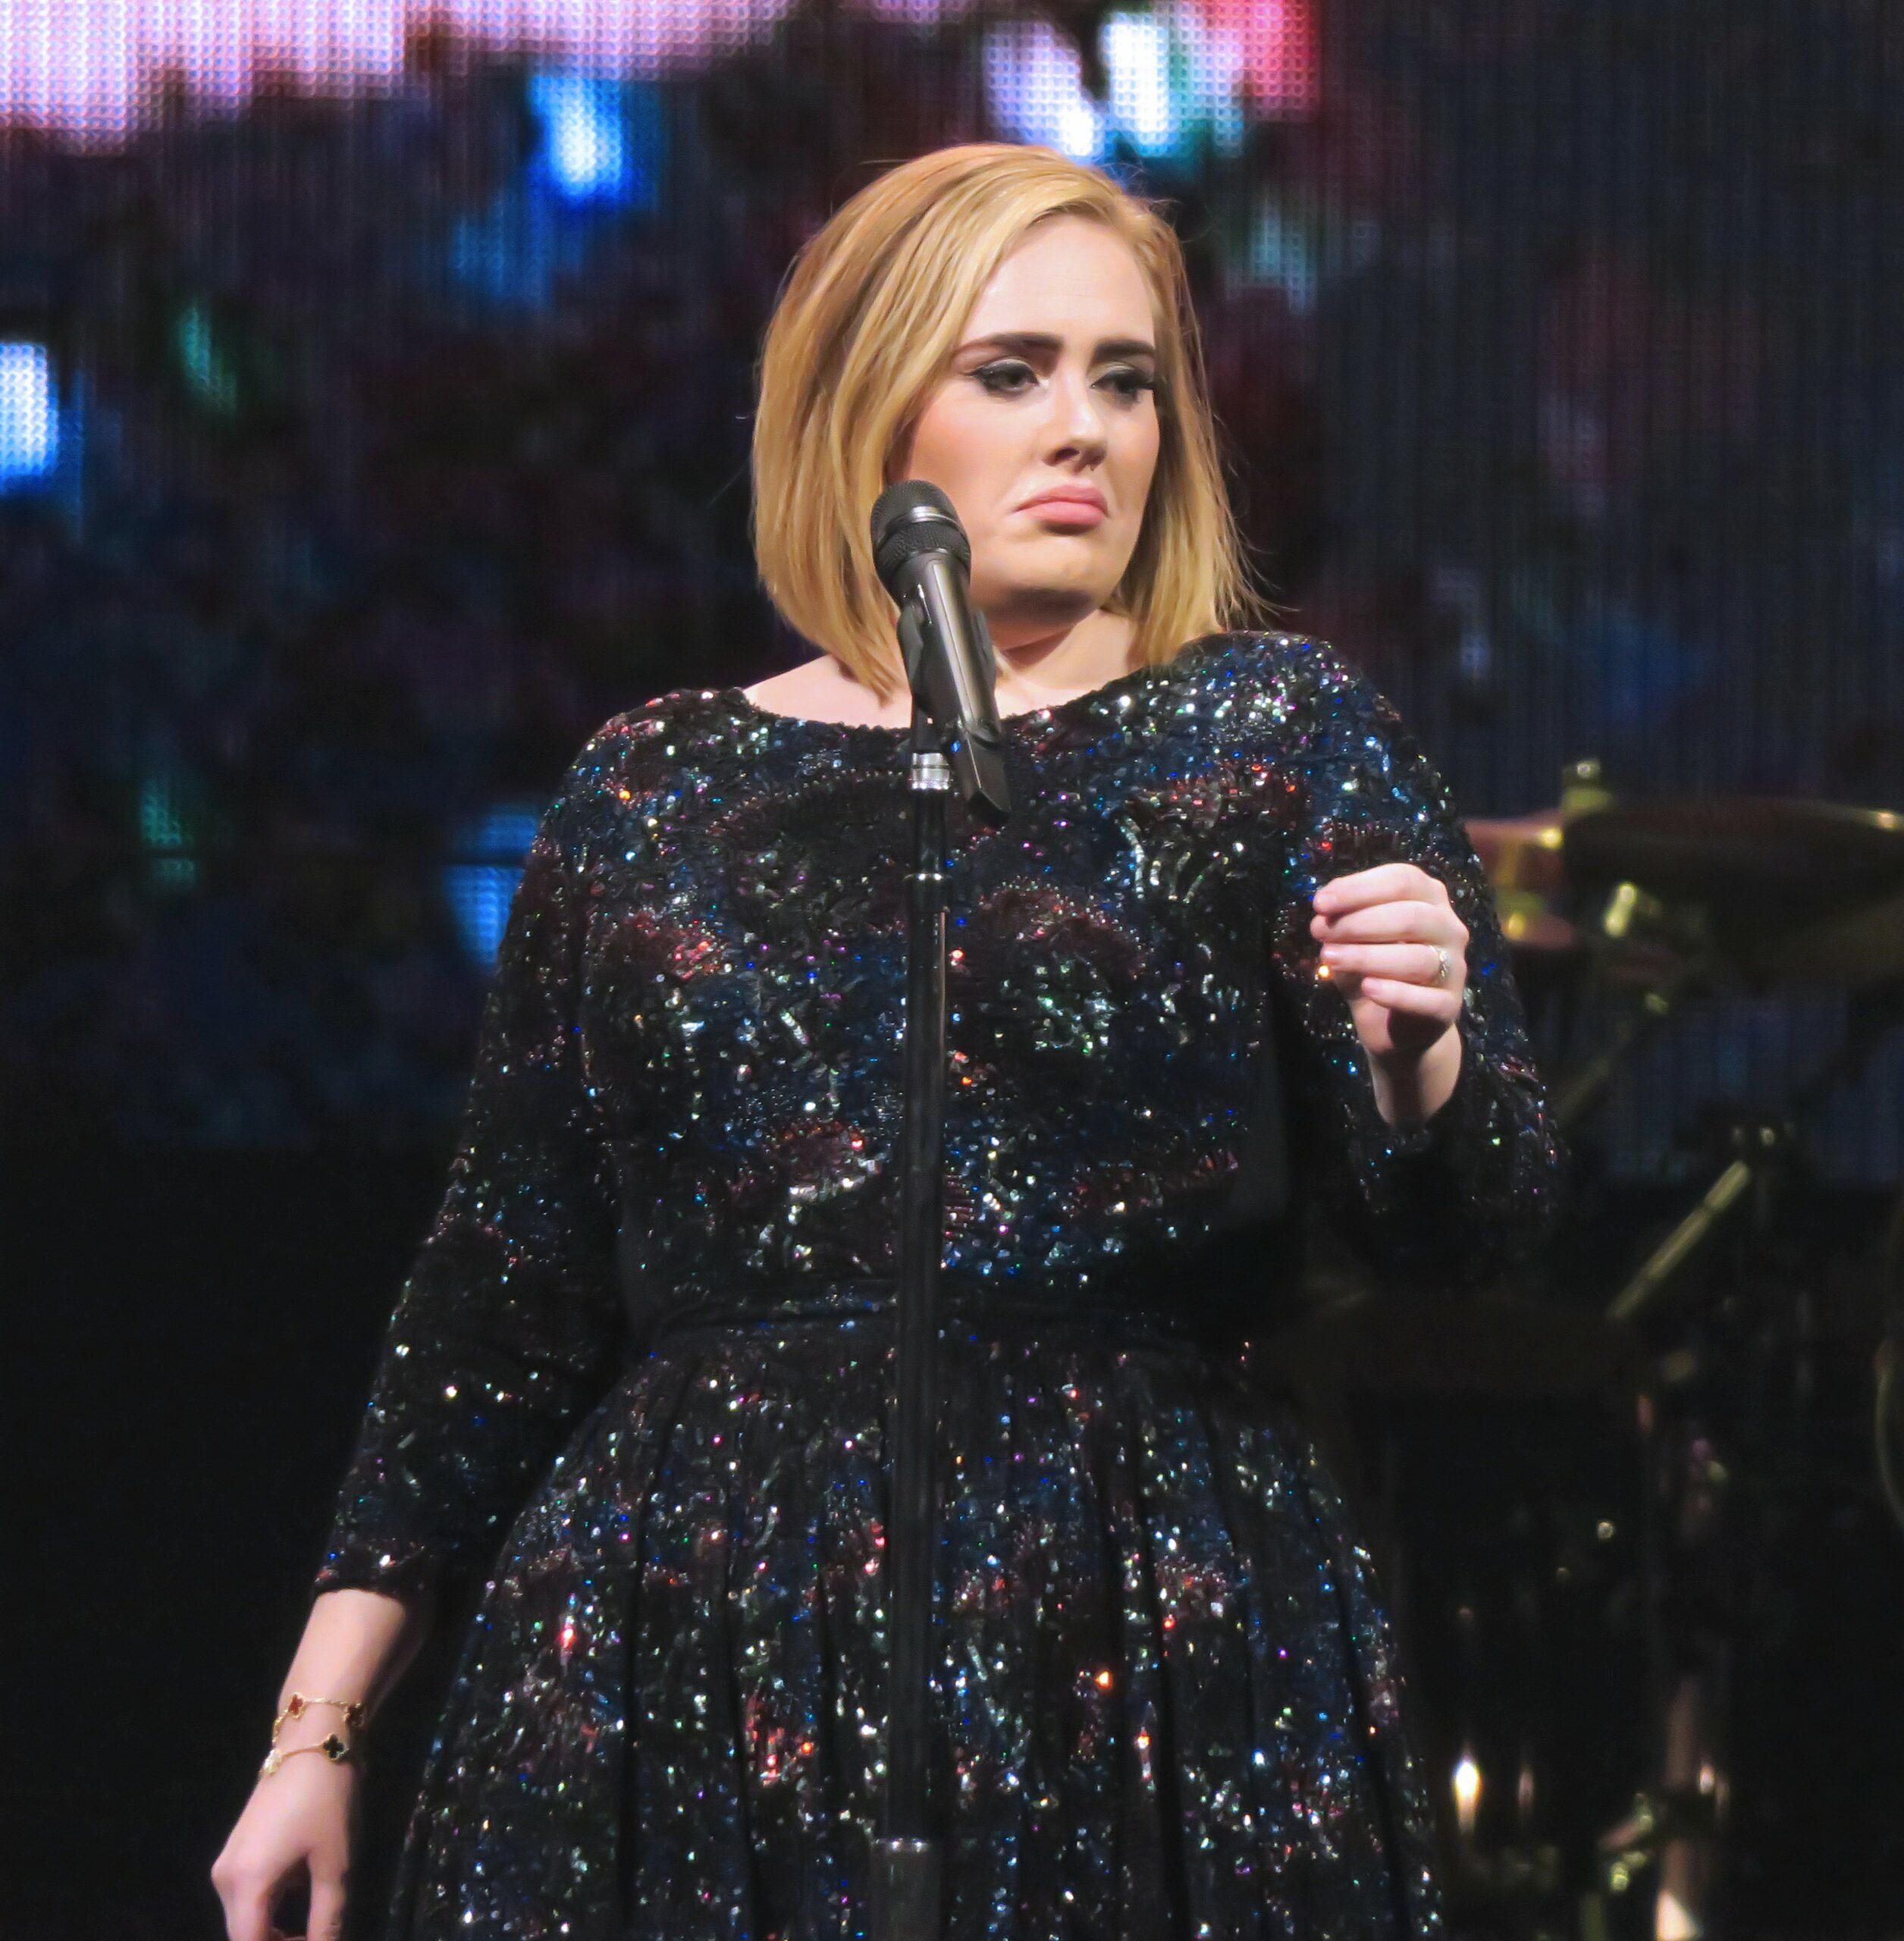 Adele standing on stage.